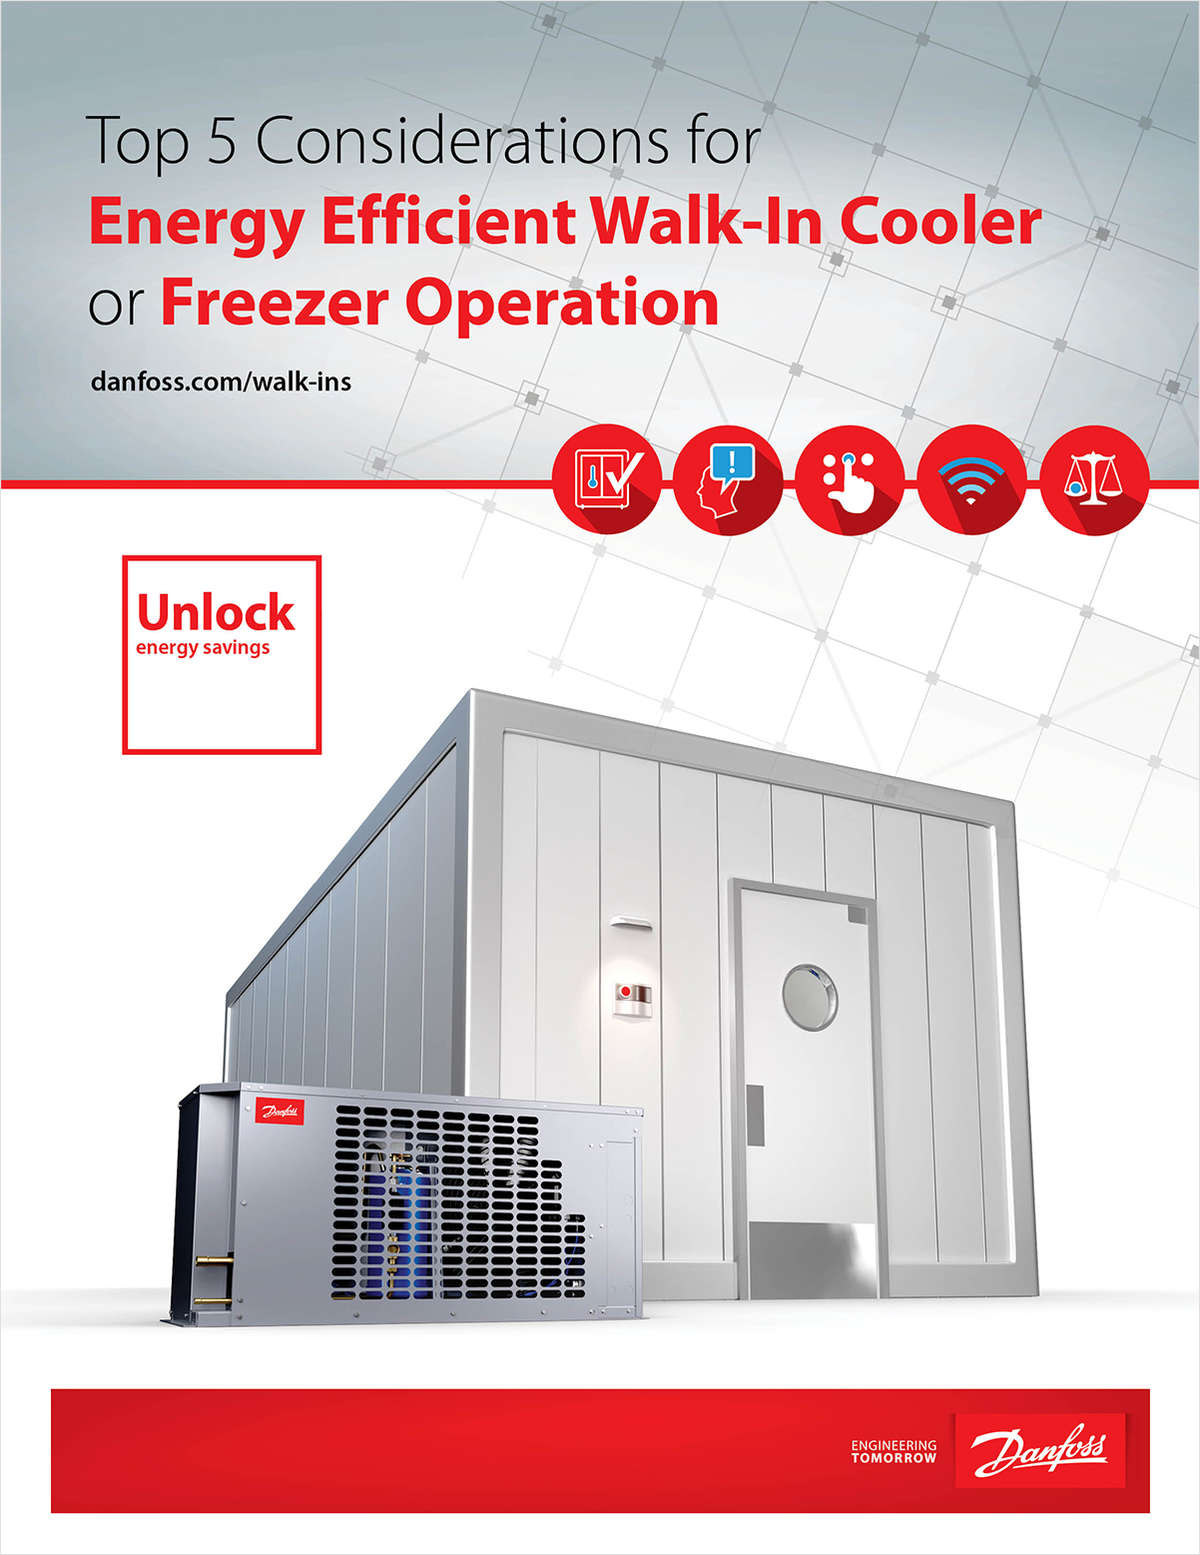 Top 5 Considerations for Energy Efficient Walk-In Cooler or Freezer Operation